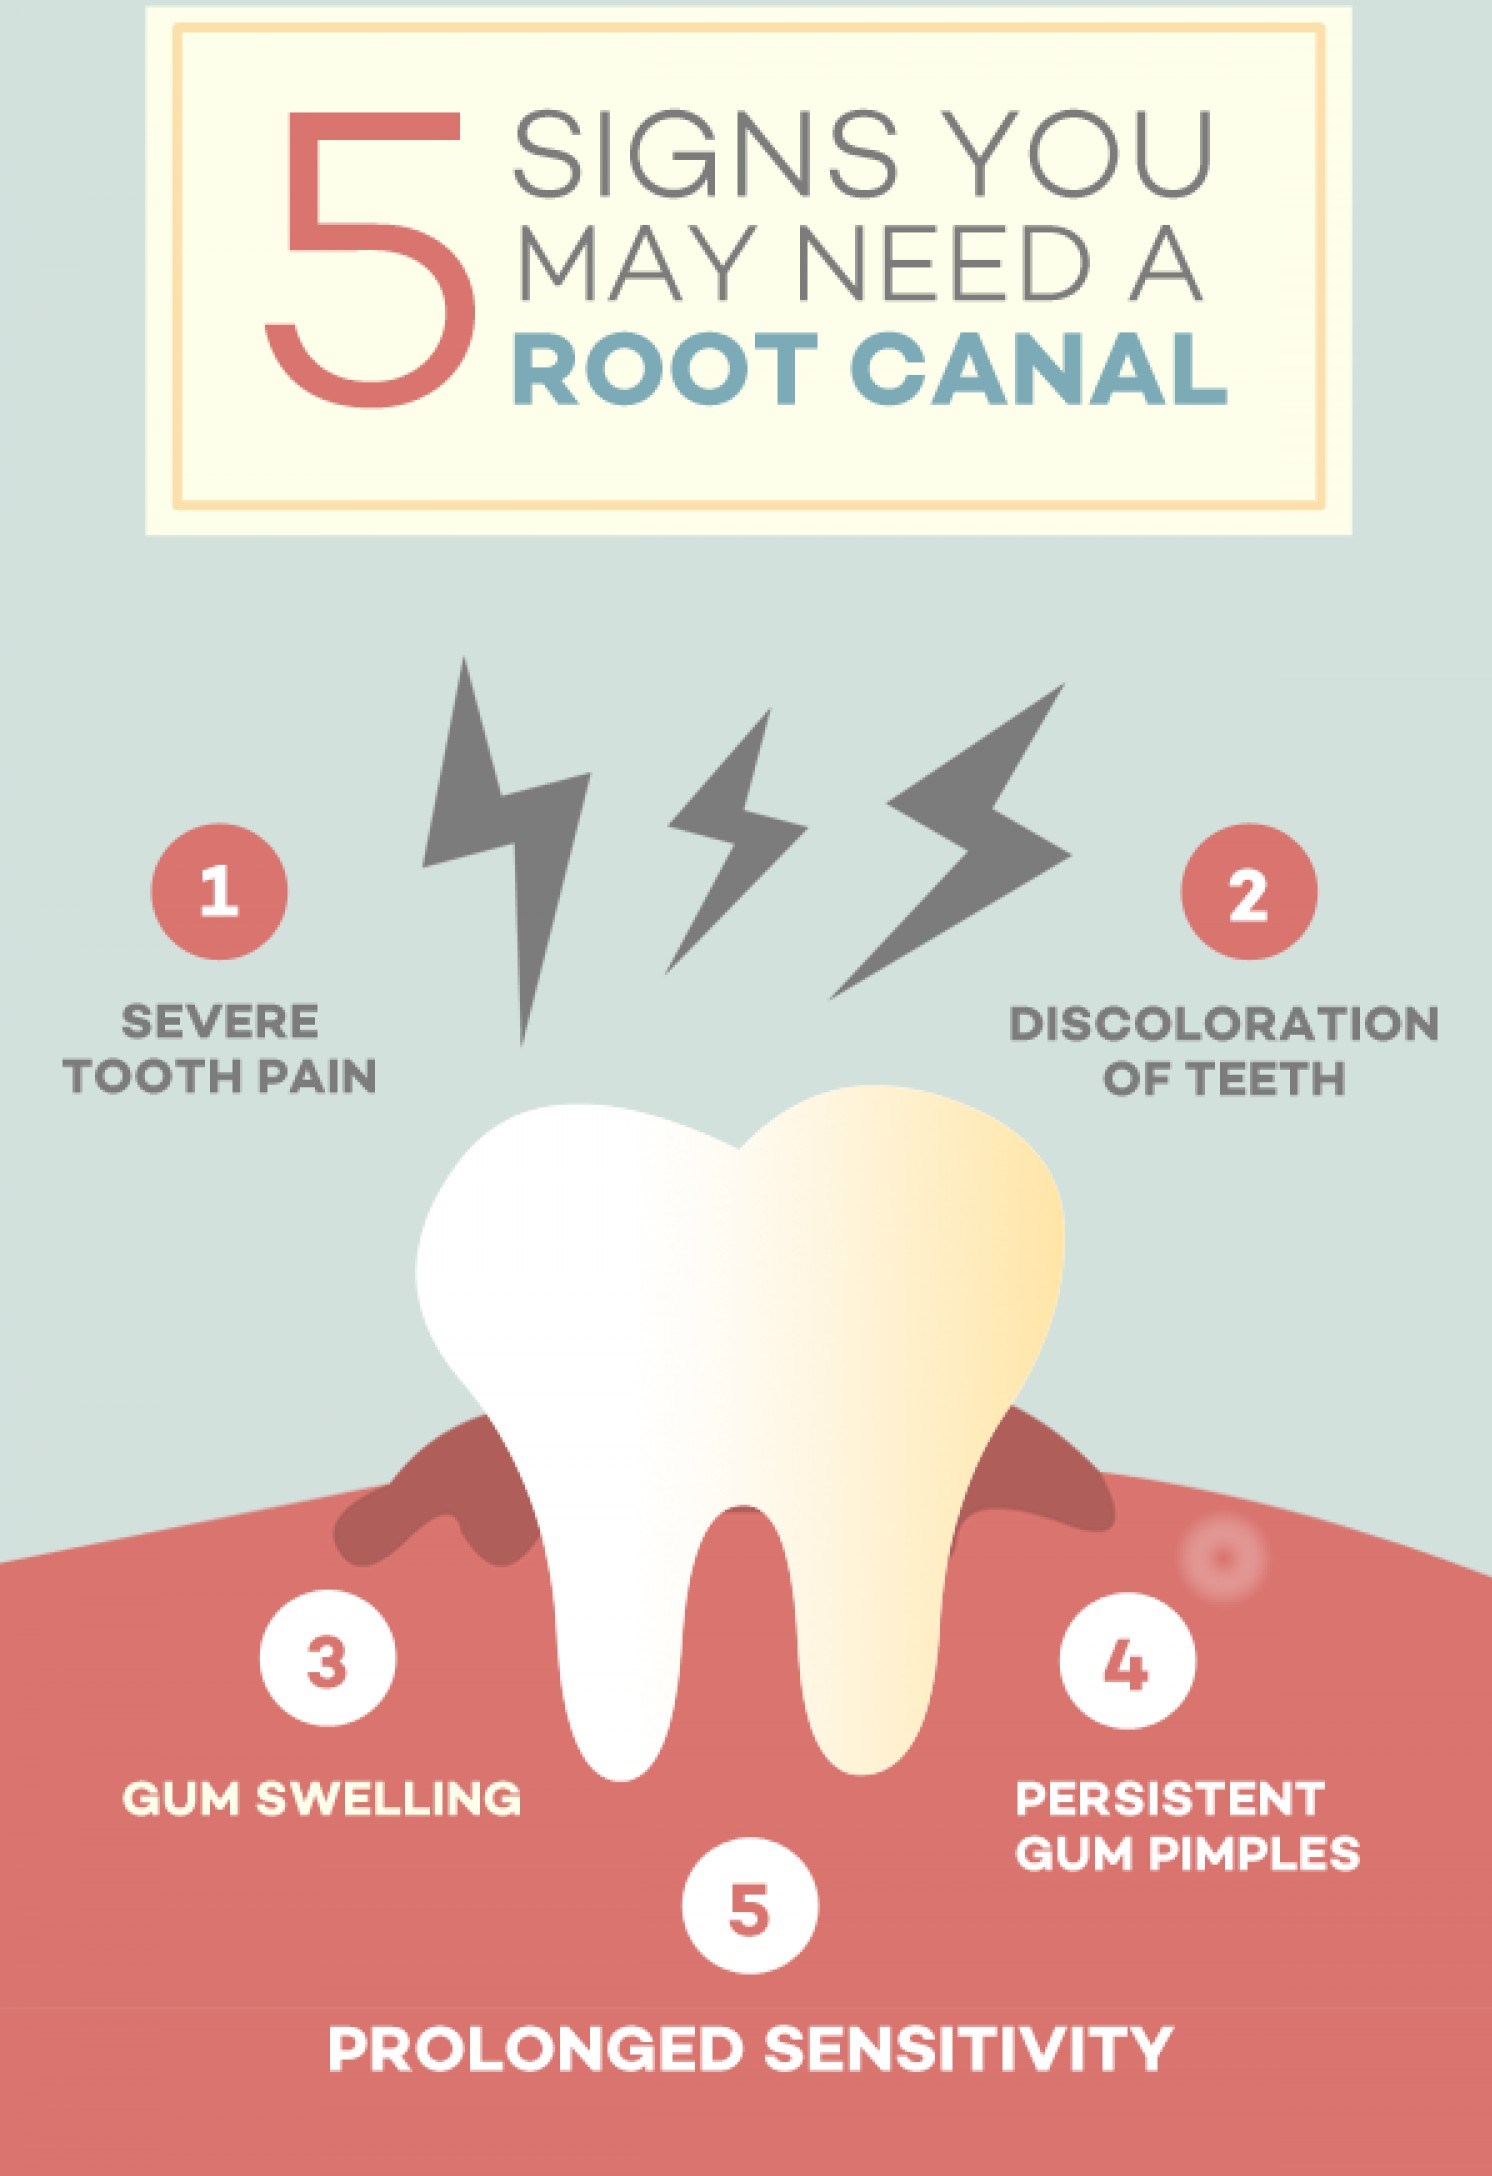 tooth that needs root canal